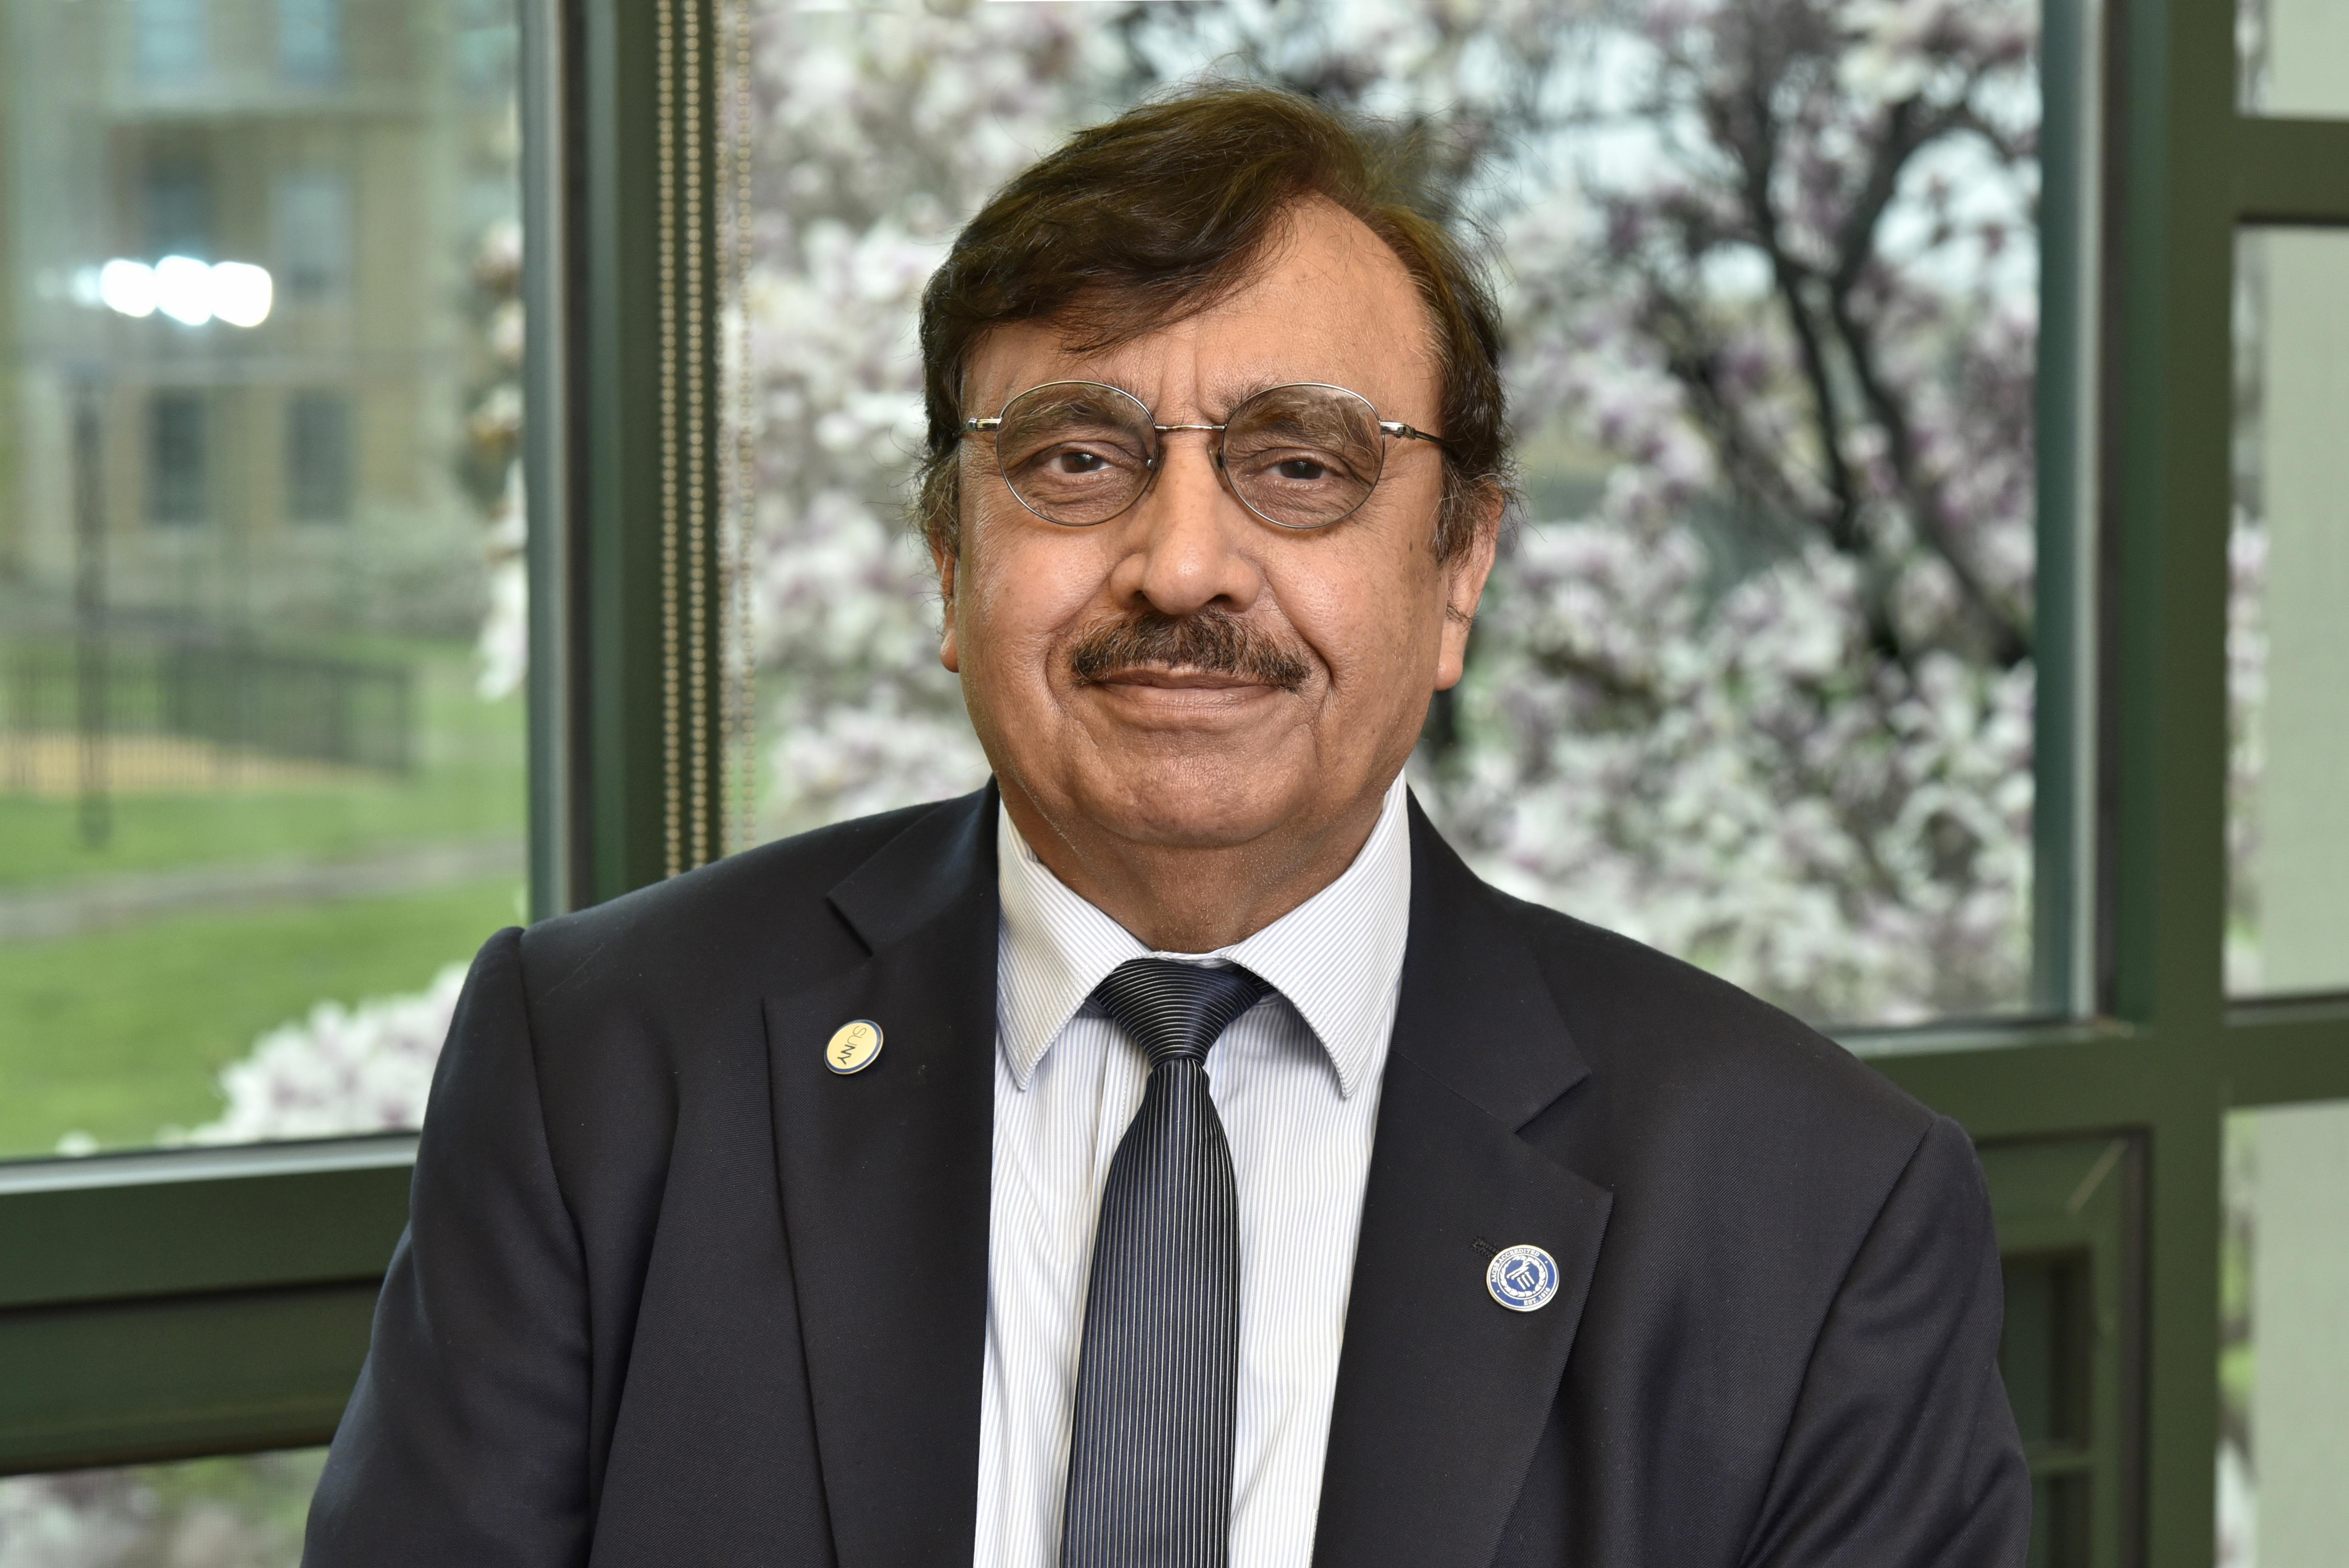 Sarfraz Mian earned the SUNY Distinguished Faculty rank through his global impact on the study of entrepreneurship